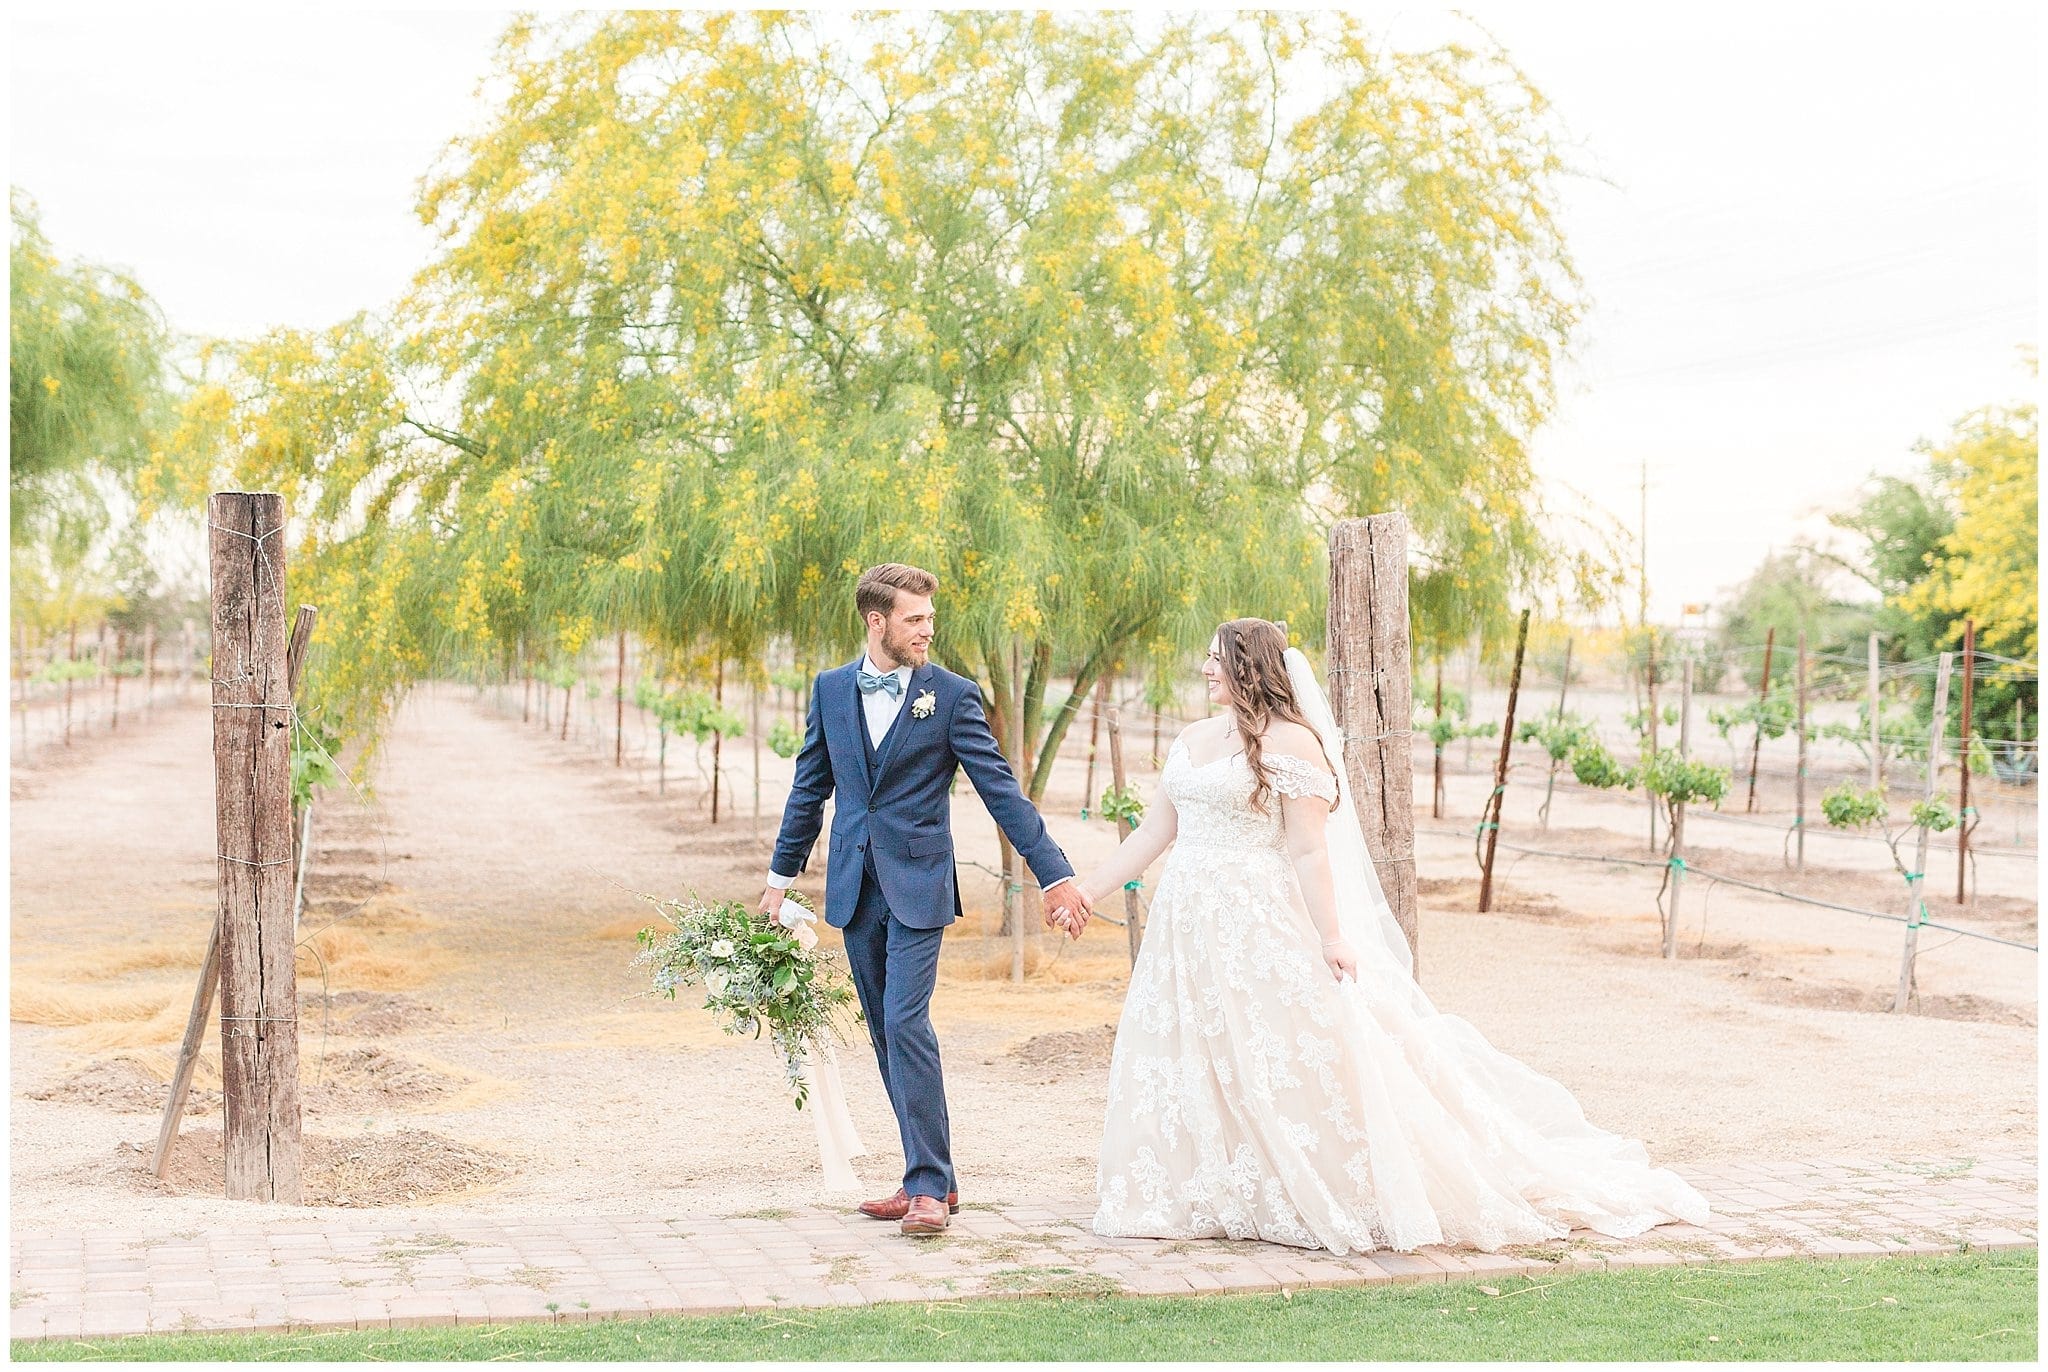 Husband and Wife Sunset Portraits Wedding Day | Windmill Winery Twisted Tree Location